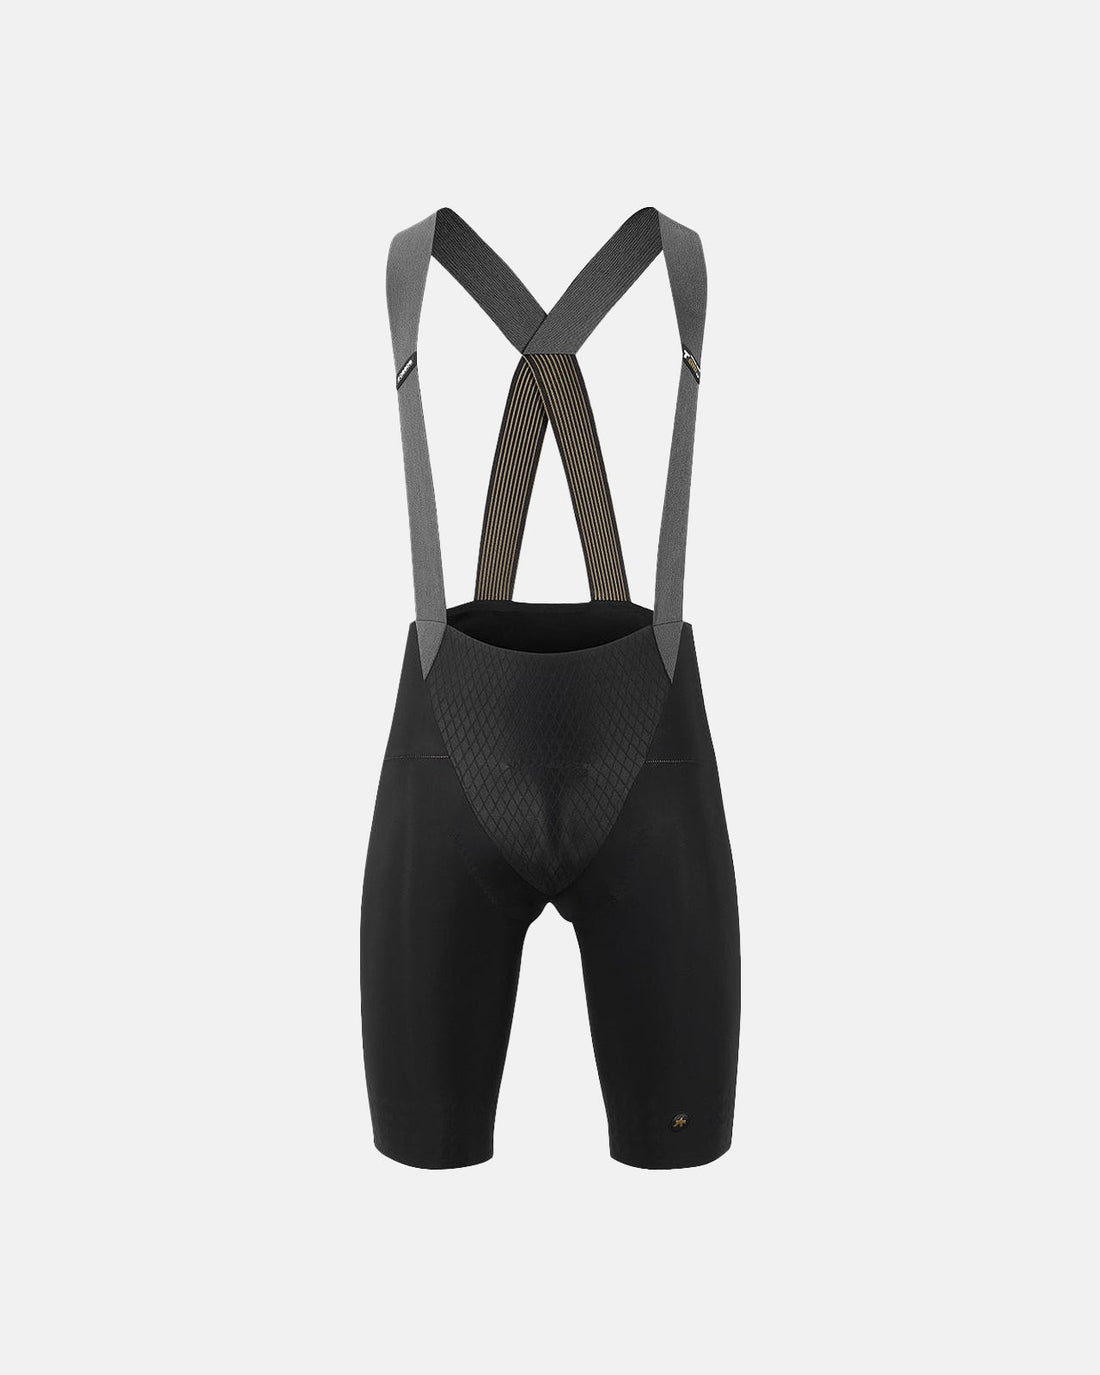 Mille GTO Bib Shorts C2 - Flamme D Or